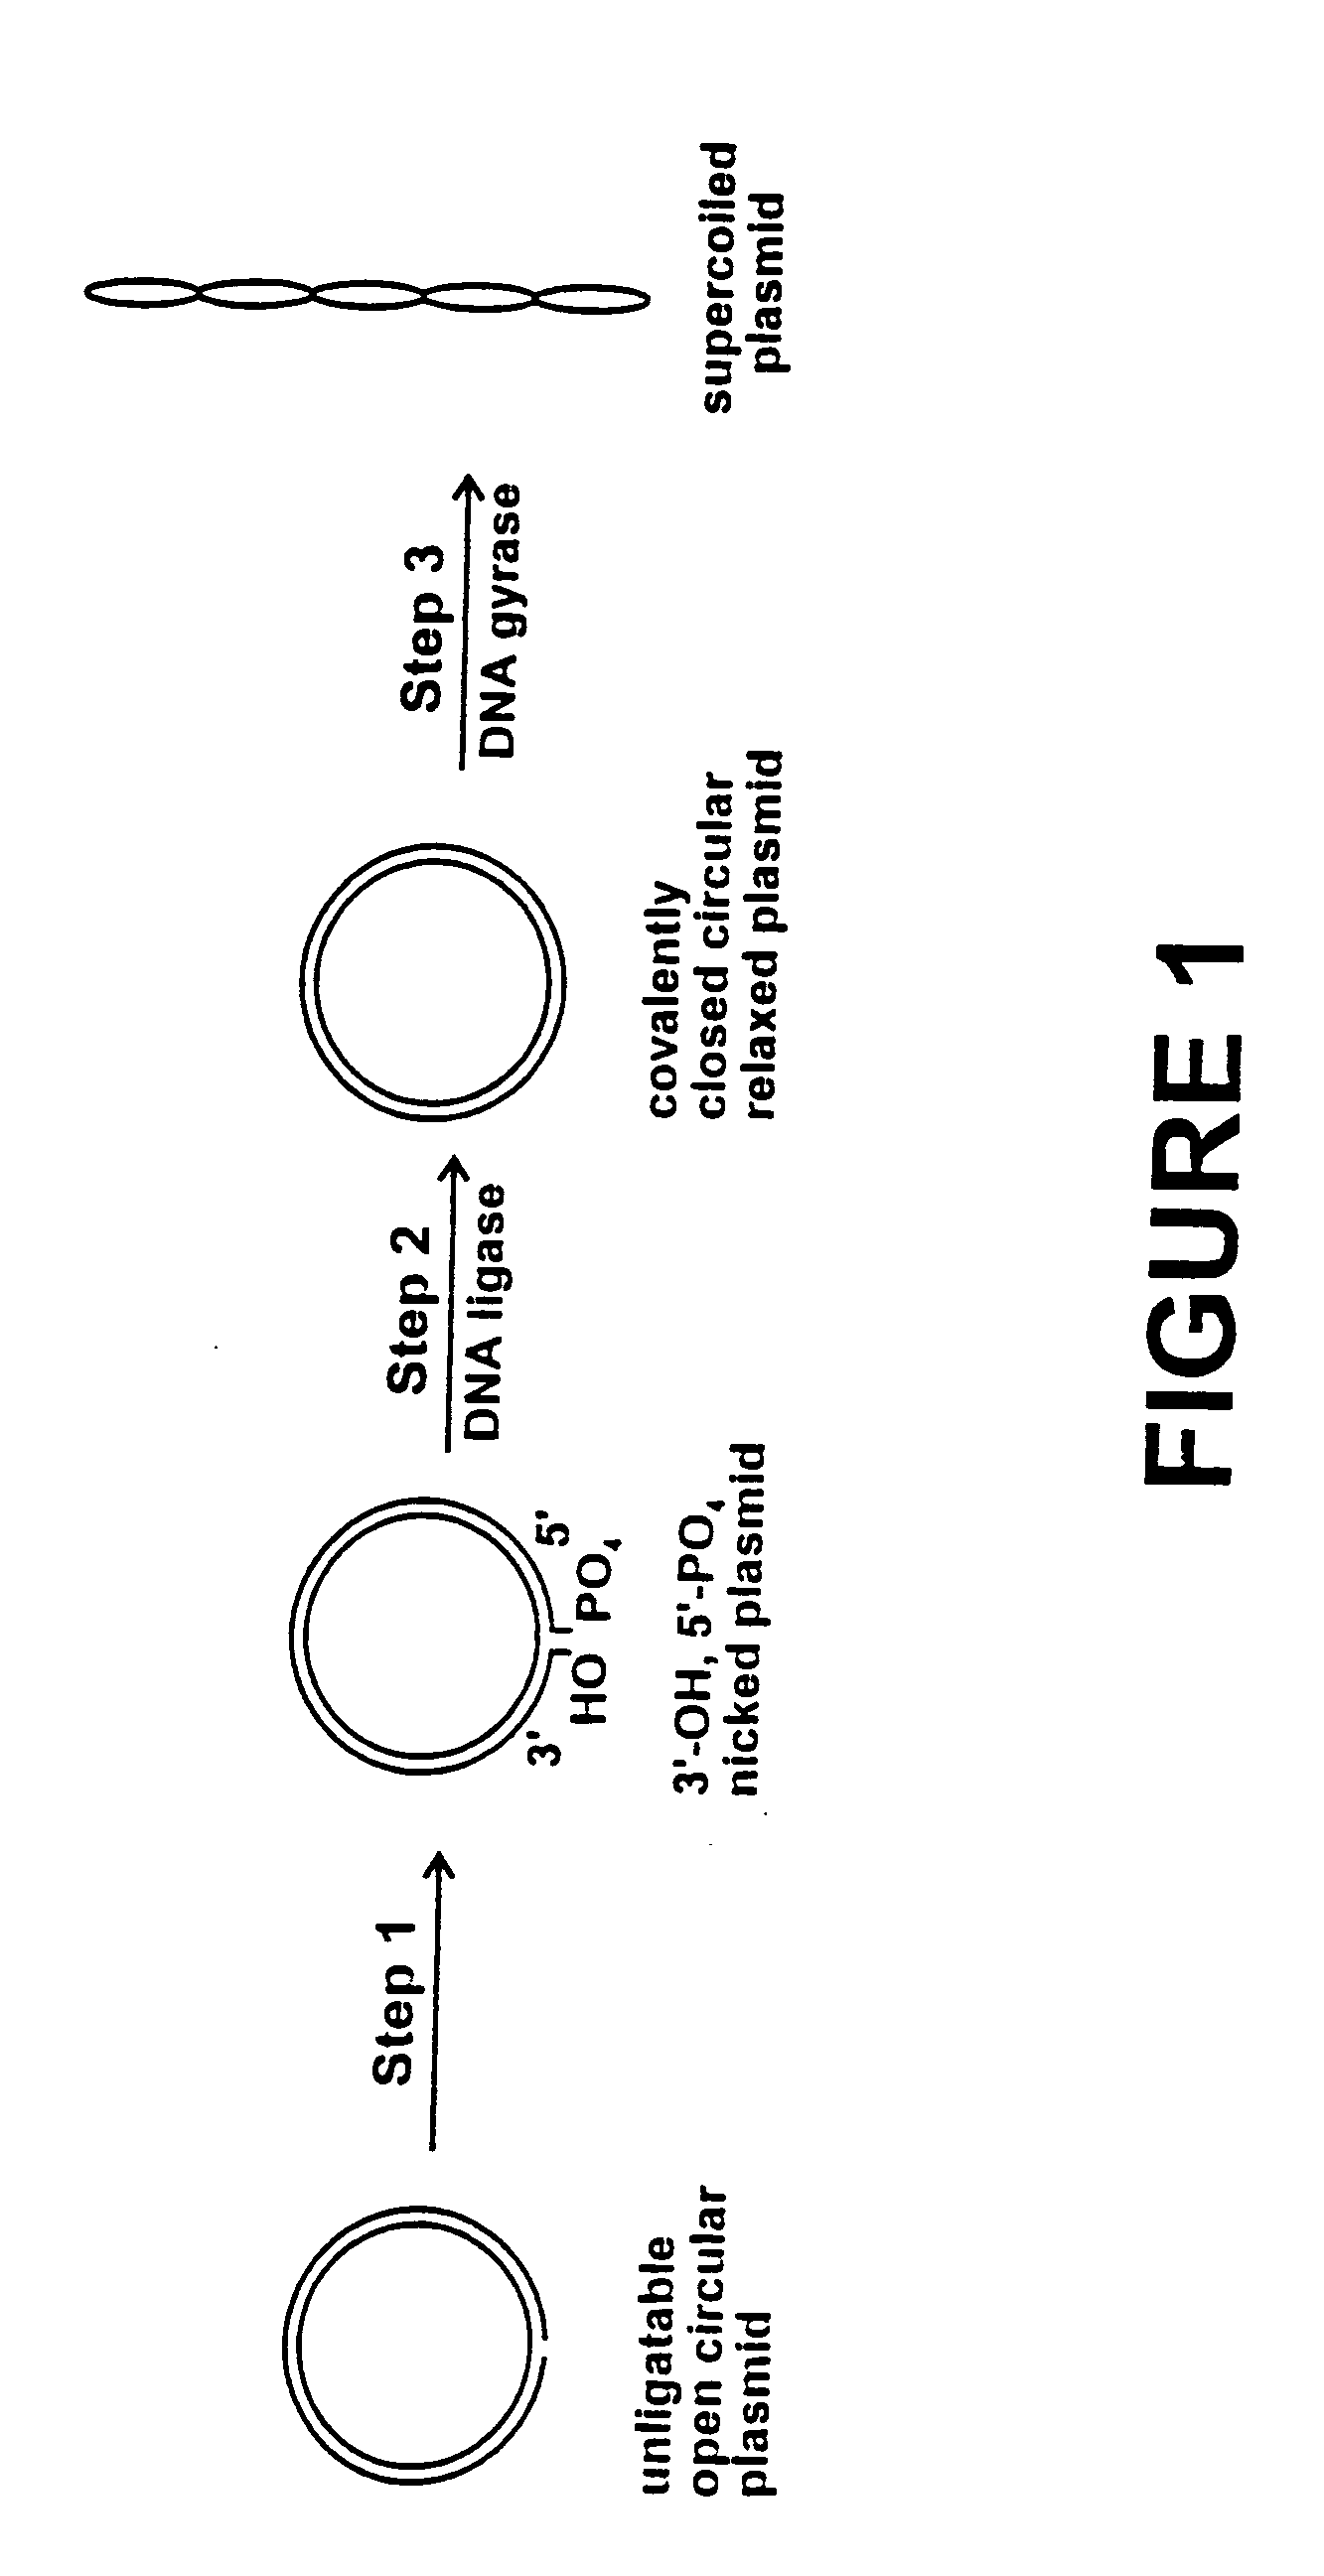 Method for plasmid preparation by conversion of open circular plasmid to supercoiled plasmid